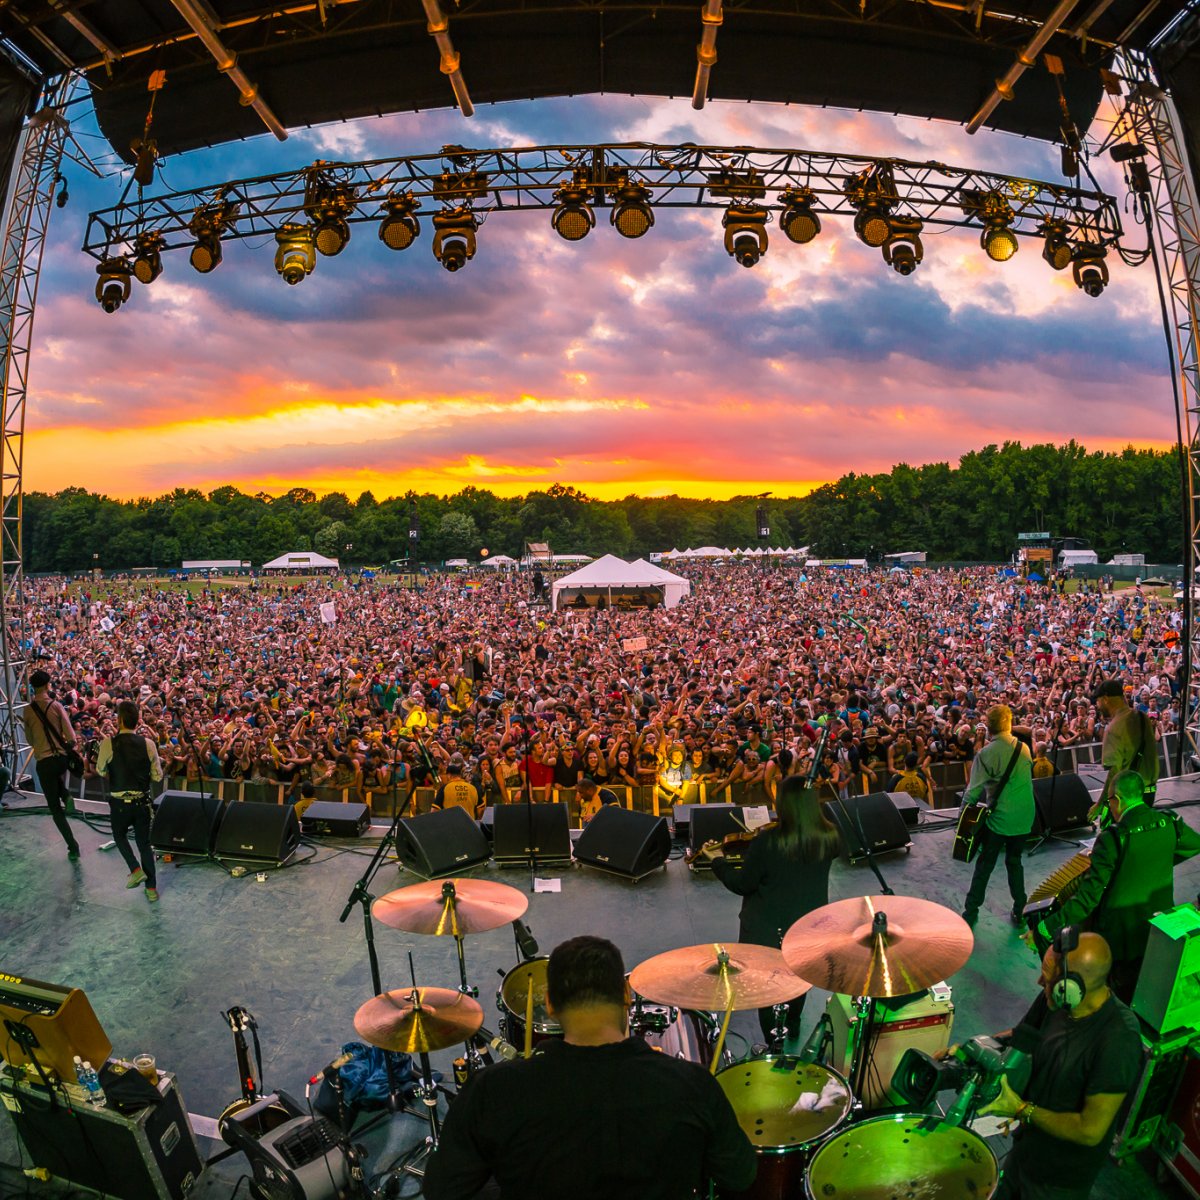 Image looking out into the crowd from behind performers on stage with a vibrant sunset at Firefly Music Festival